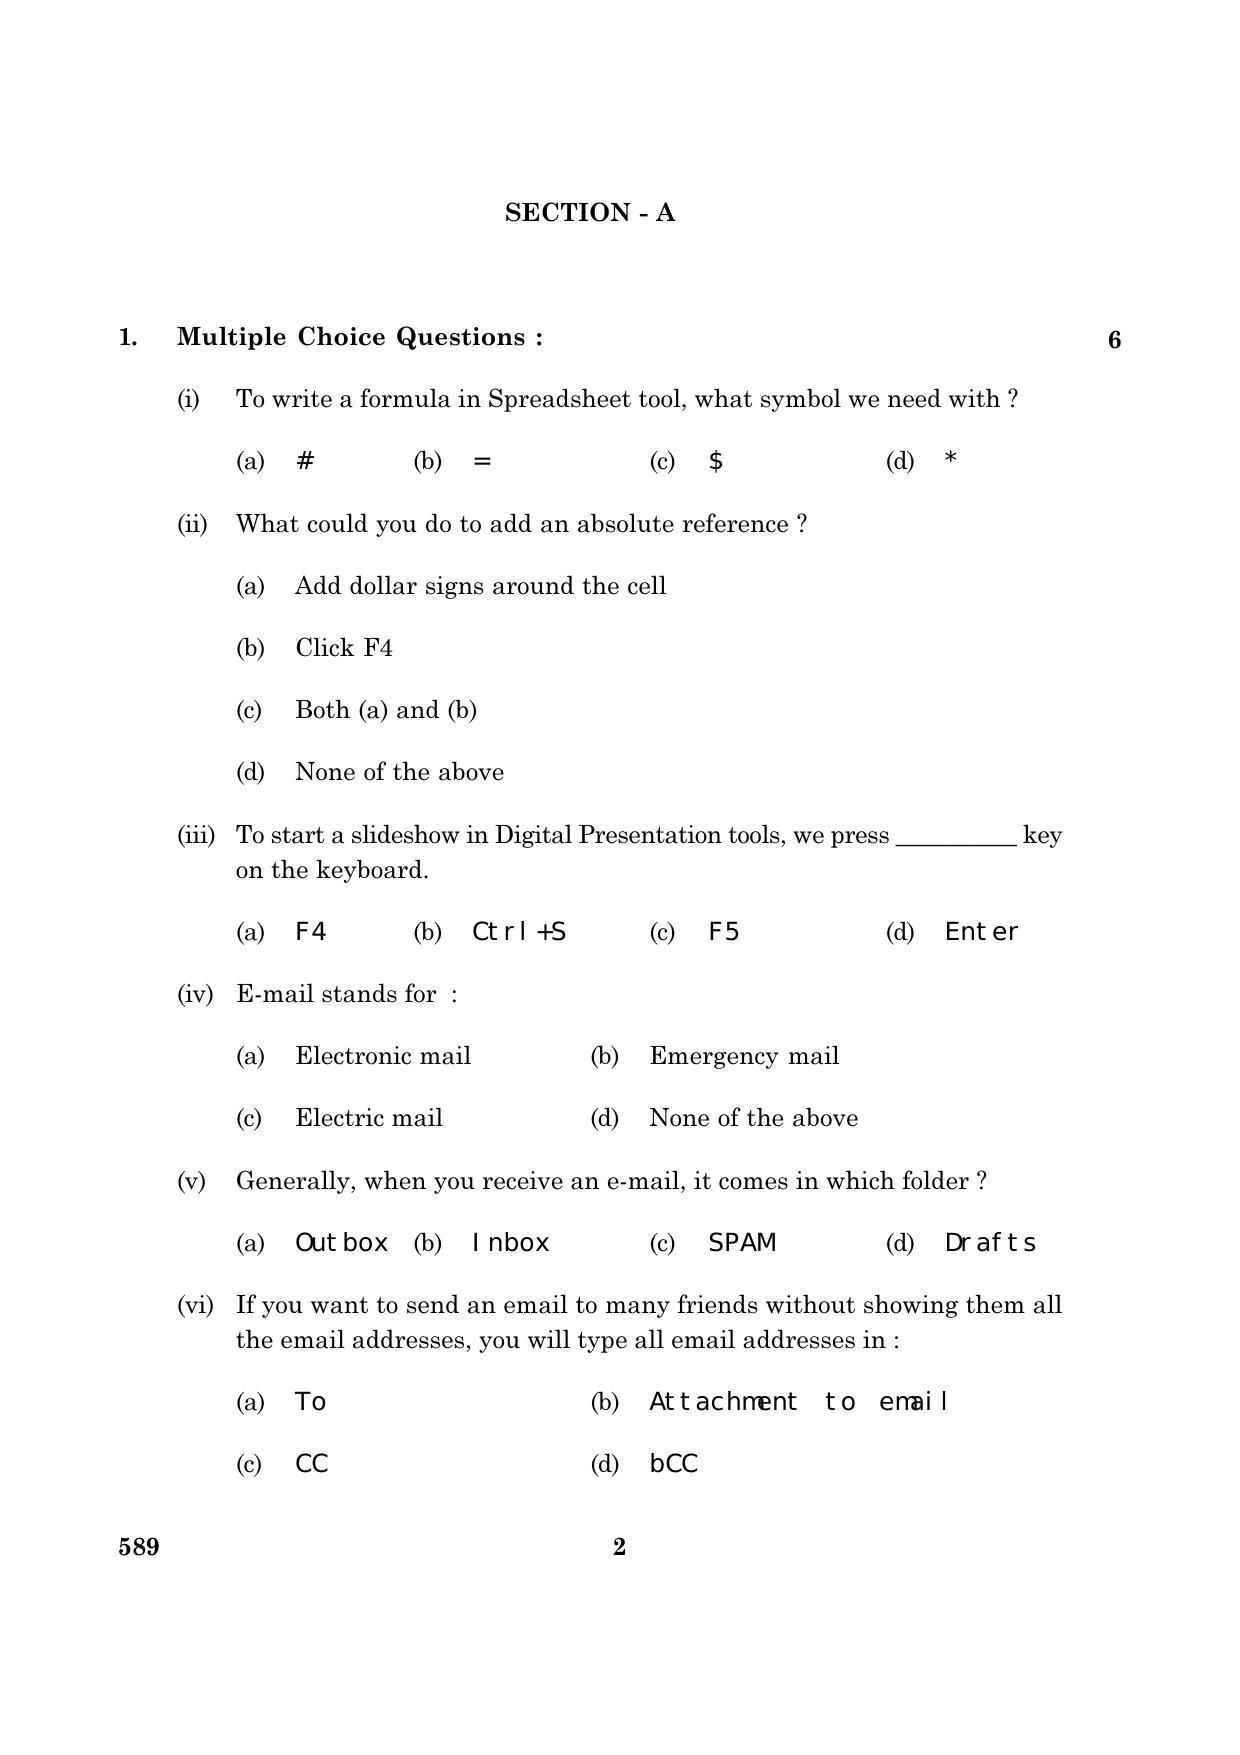 CBSE Class 10 NSQF 589 Information Technology 2016 Question Paper - Page 2